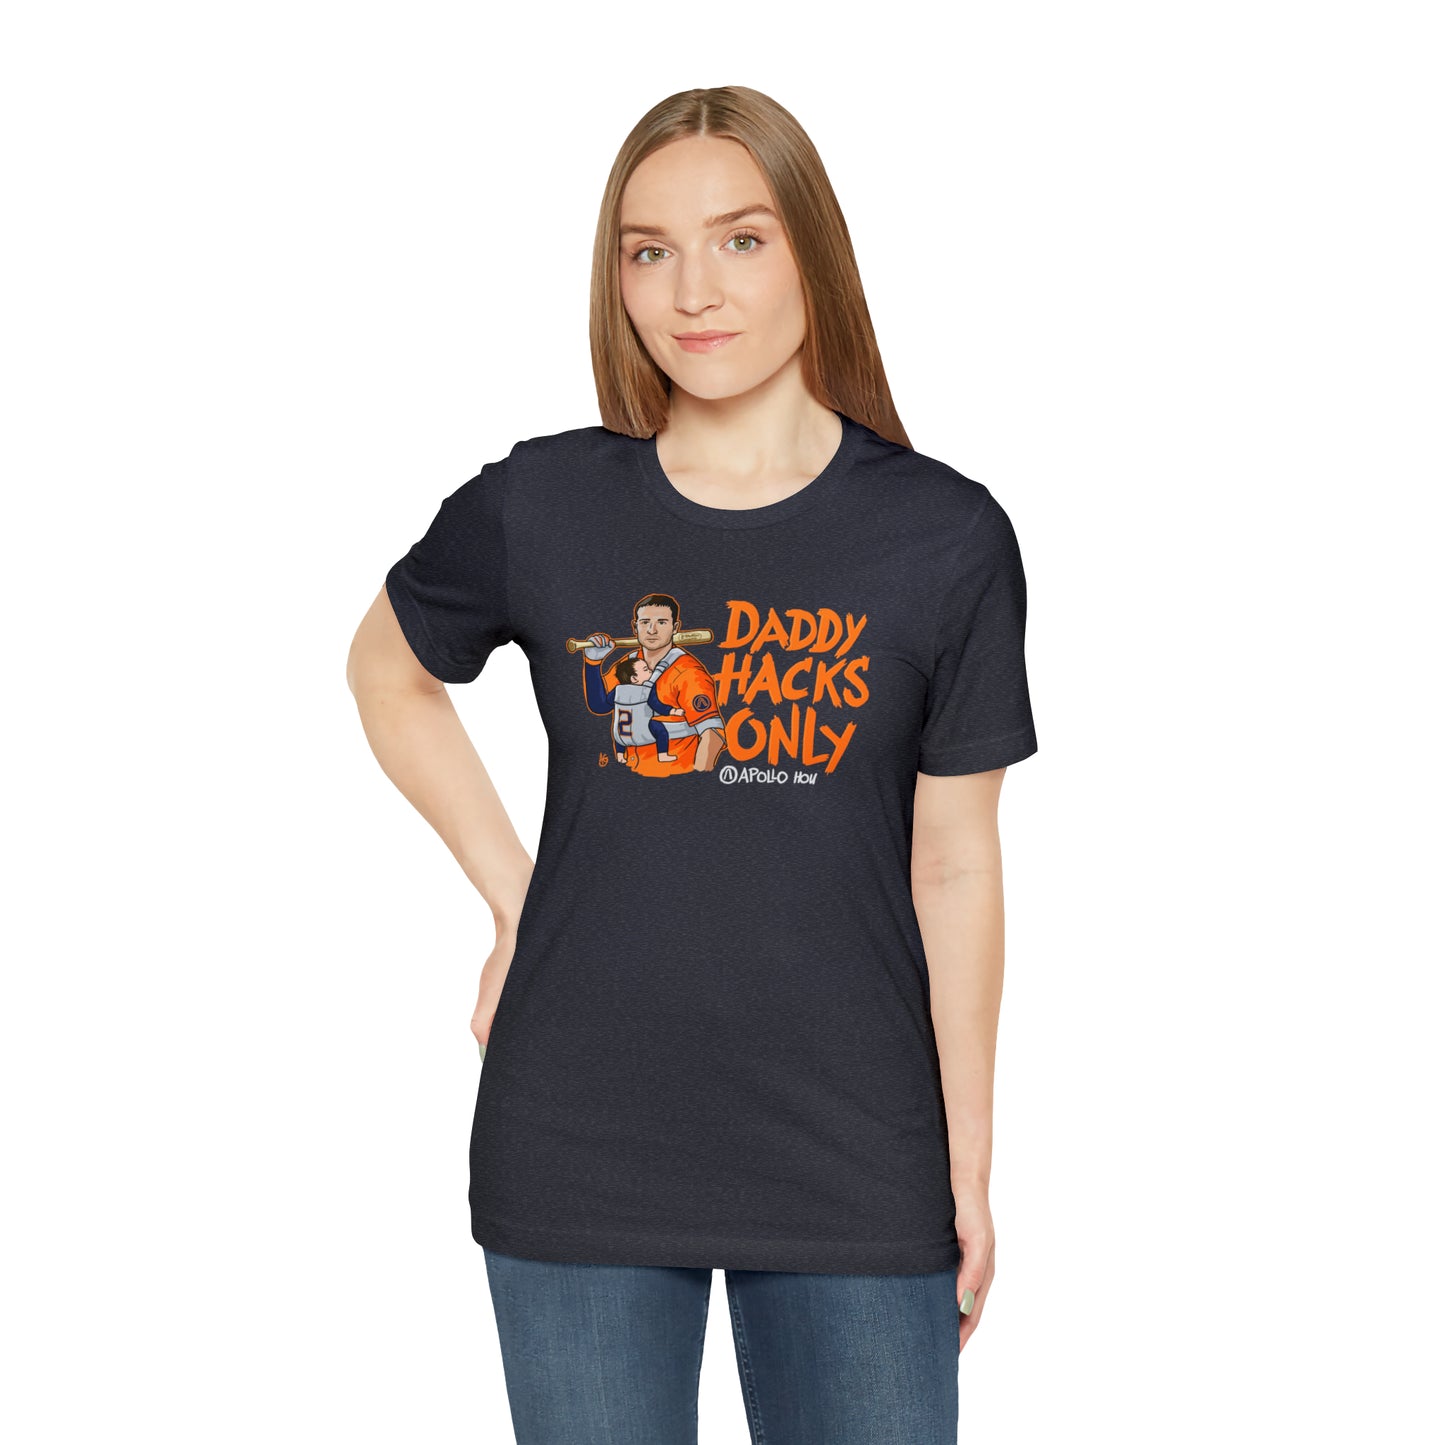 Daddy Hacks Only Unisex Jersey Tee